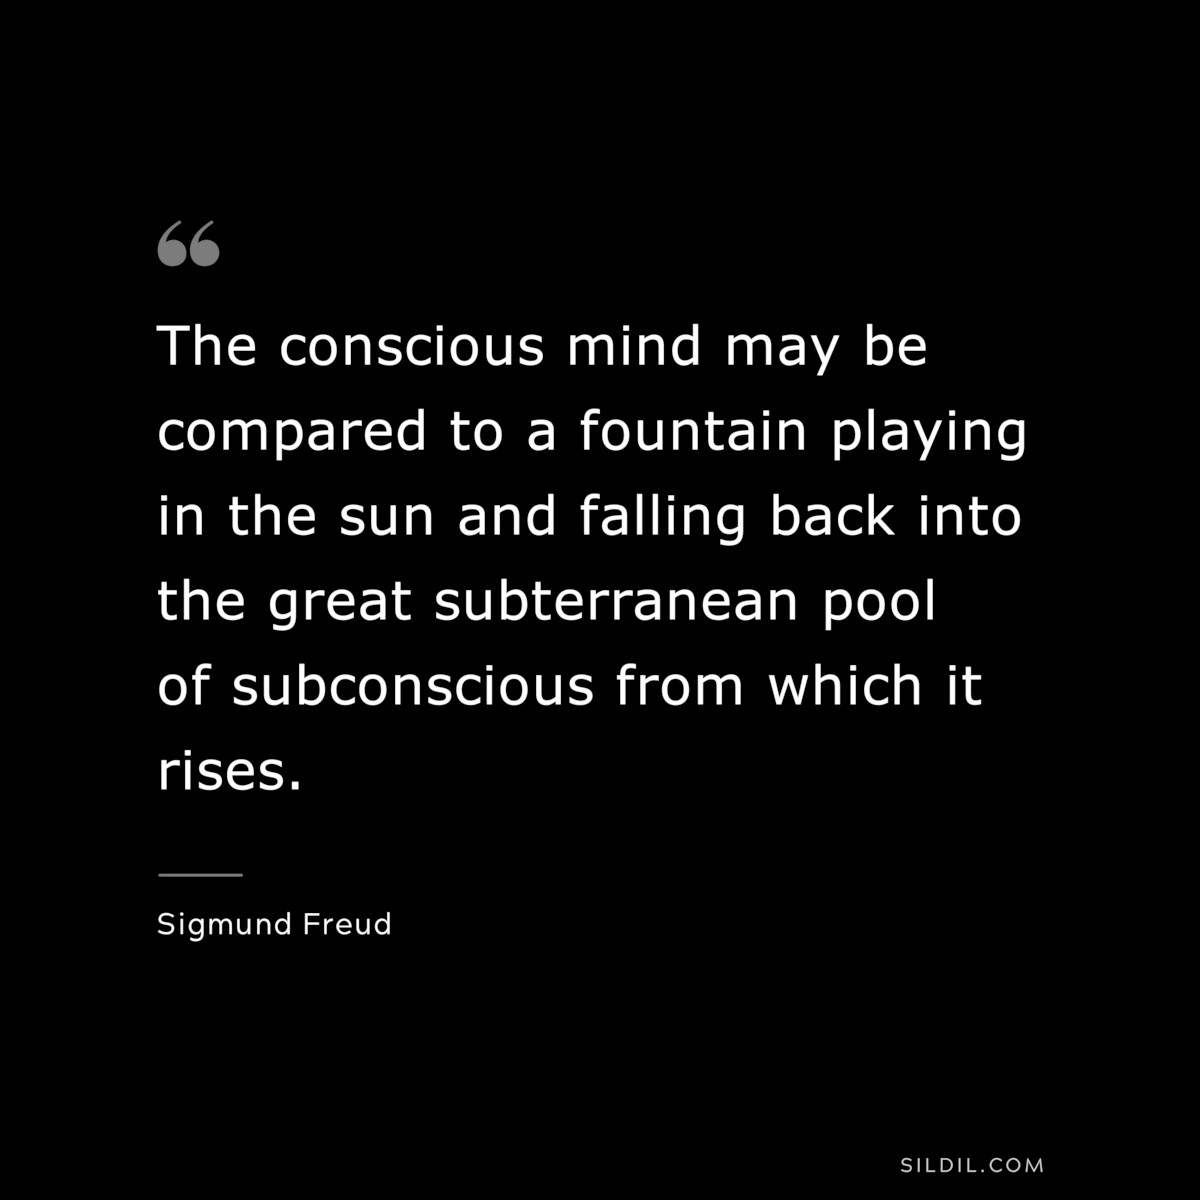 The conscious mind may be compared to a fountain playing in the sun and falling back into the great subterranean pool of subconscious from which it rises. ― Sigmund Frued